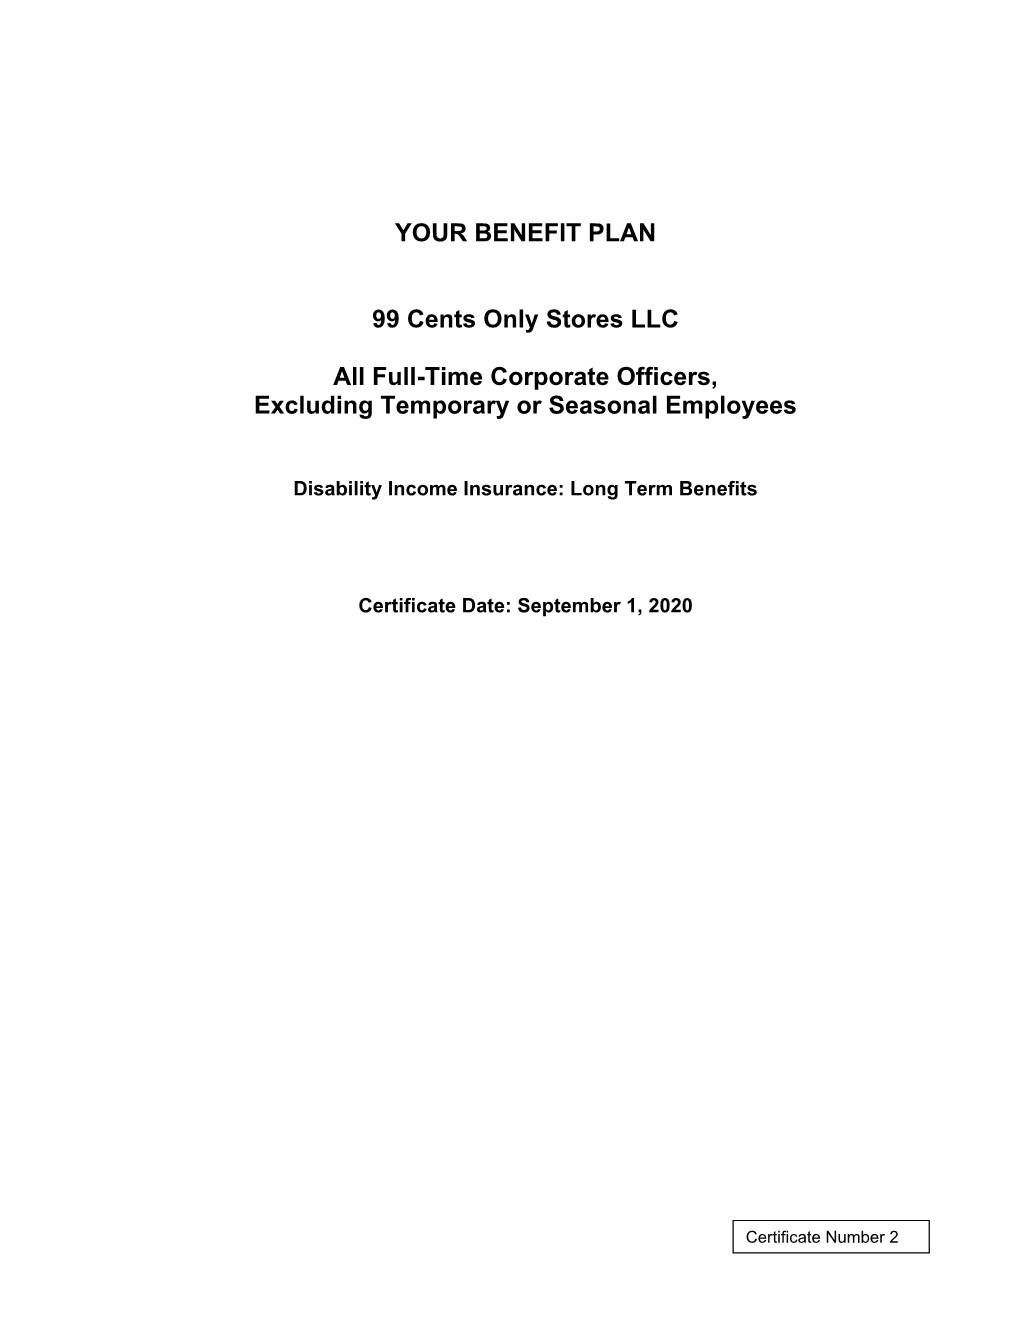 YOUR BENEFIT PLAN 99 Cents Only Stores LLC All Full-Time Corporate